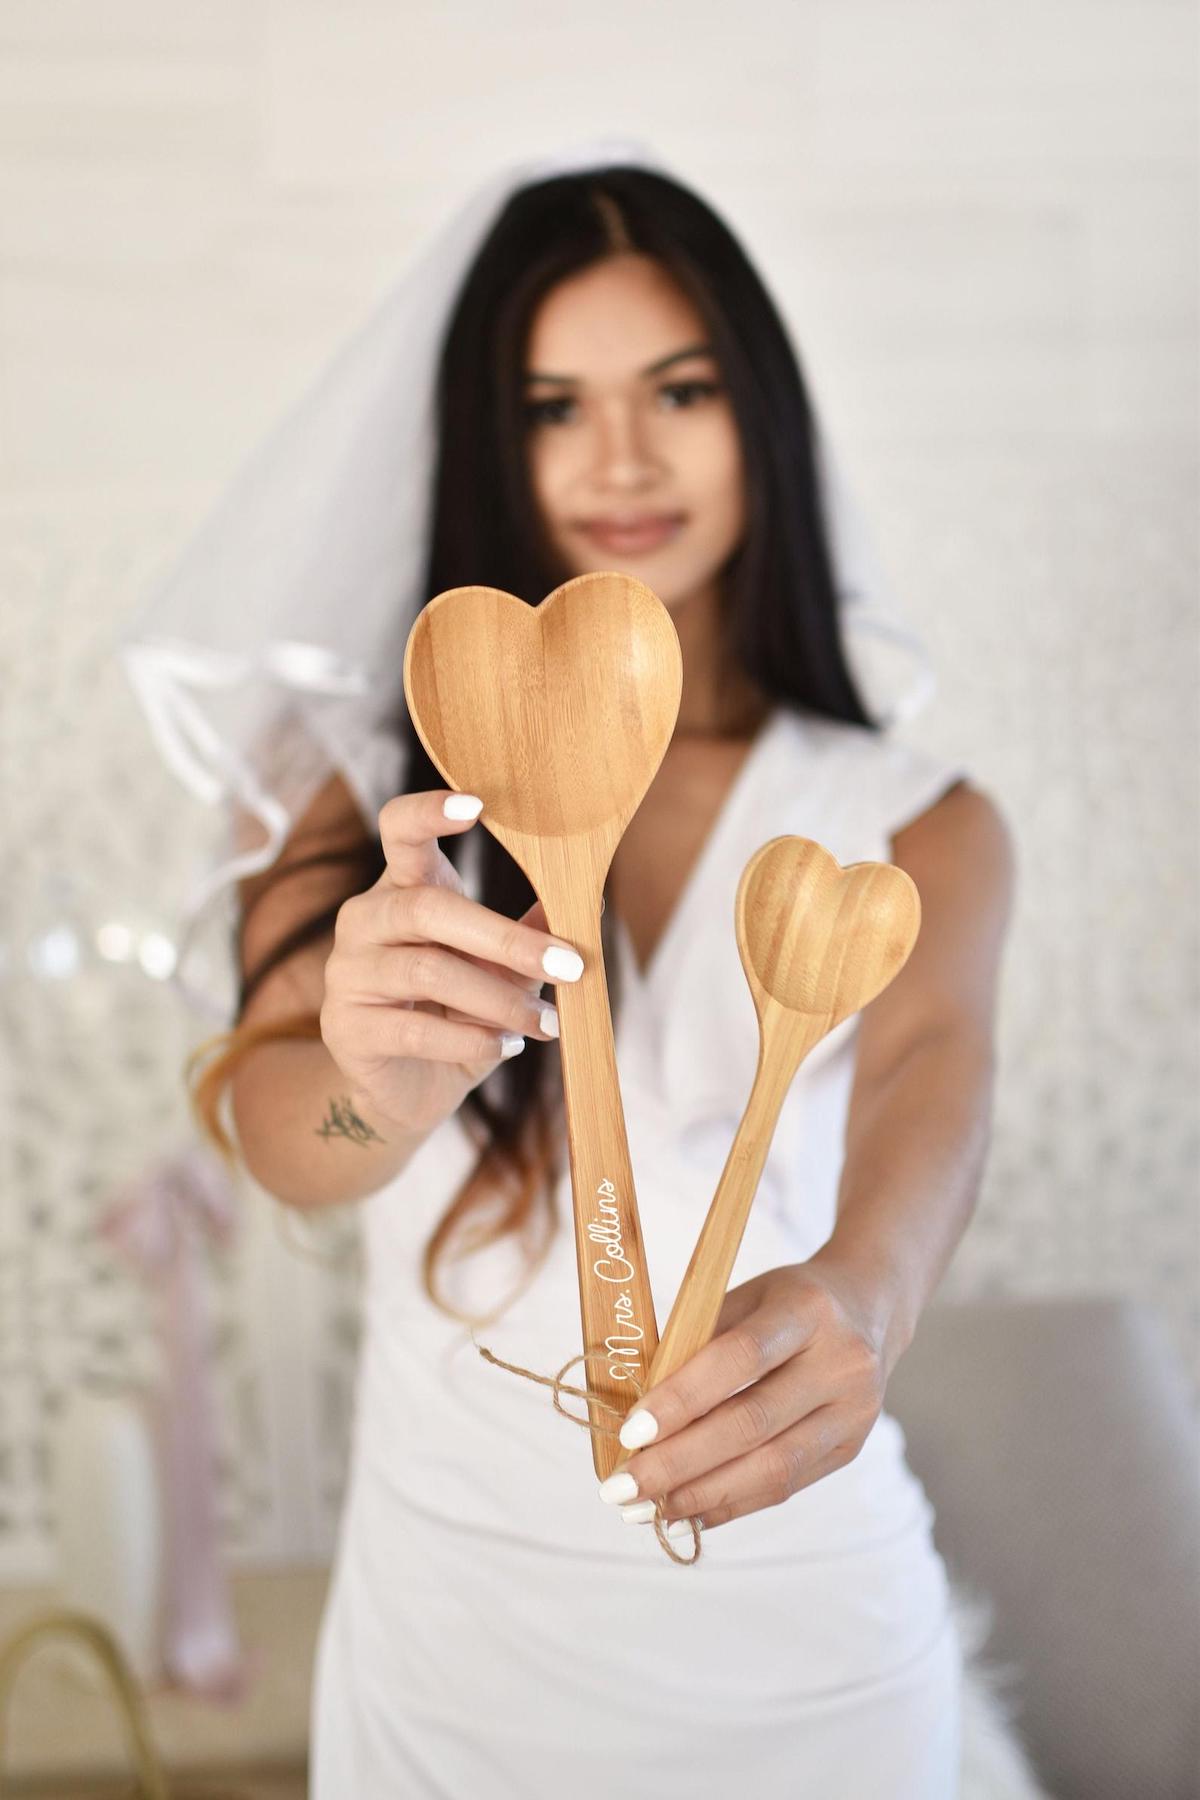 Heart-shaped wooden spoons for the newlyweds